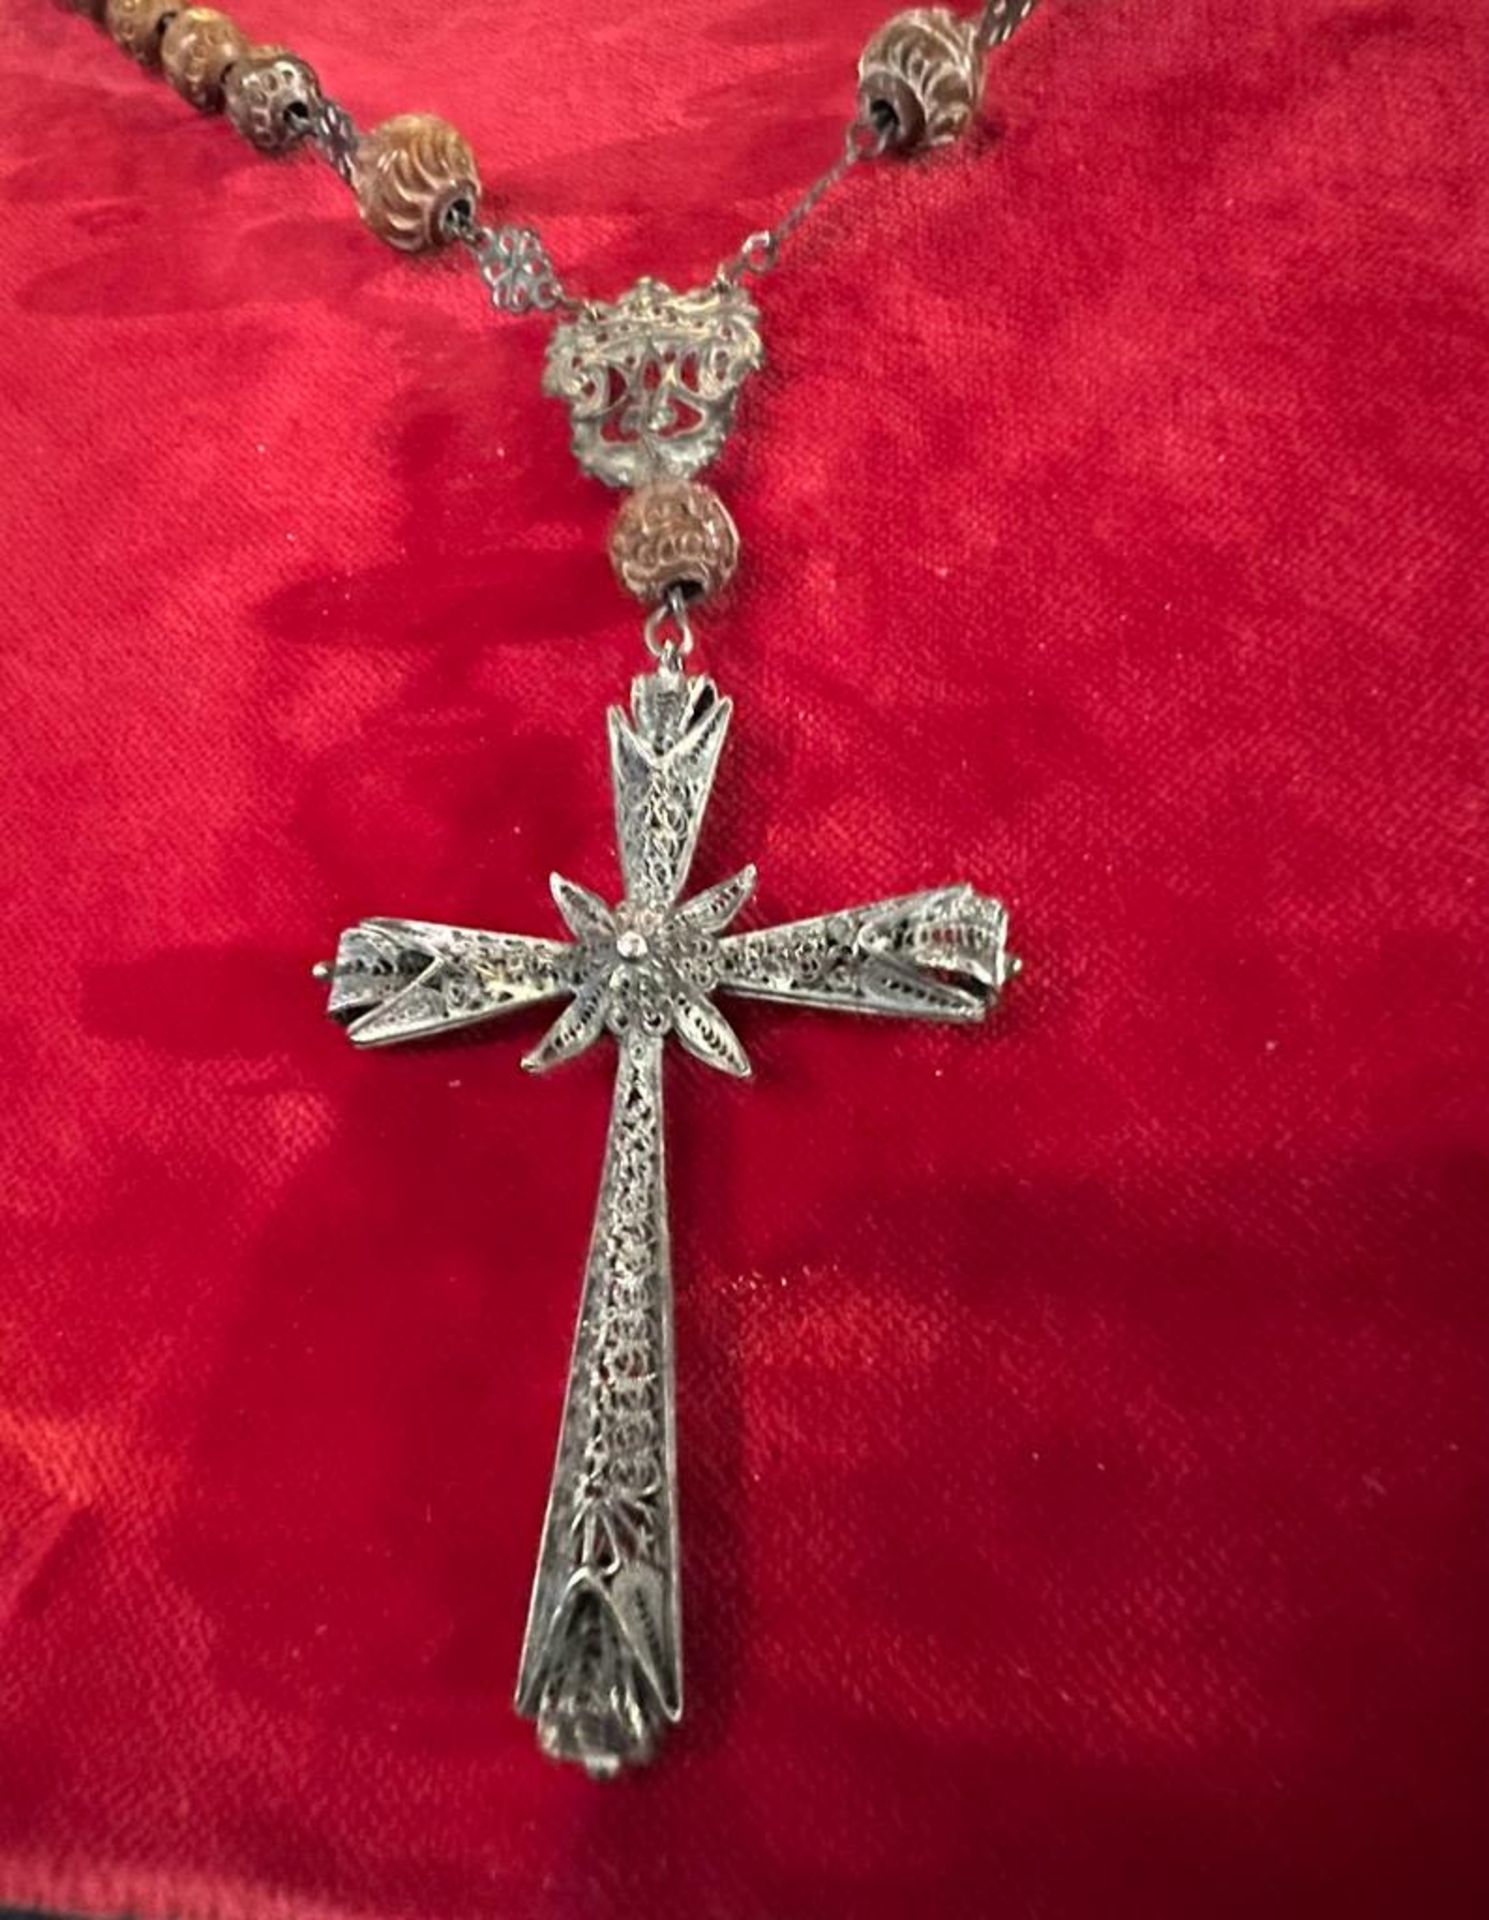 Rare large Portuguese or Spanish colonial Rosary in Coconut beads and fine silver filgree, 18th cent - Image 6 of 6